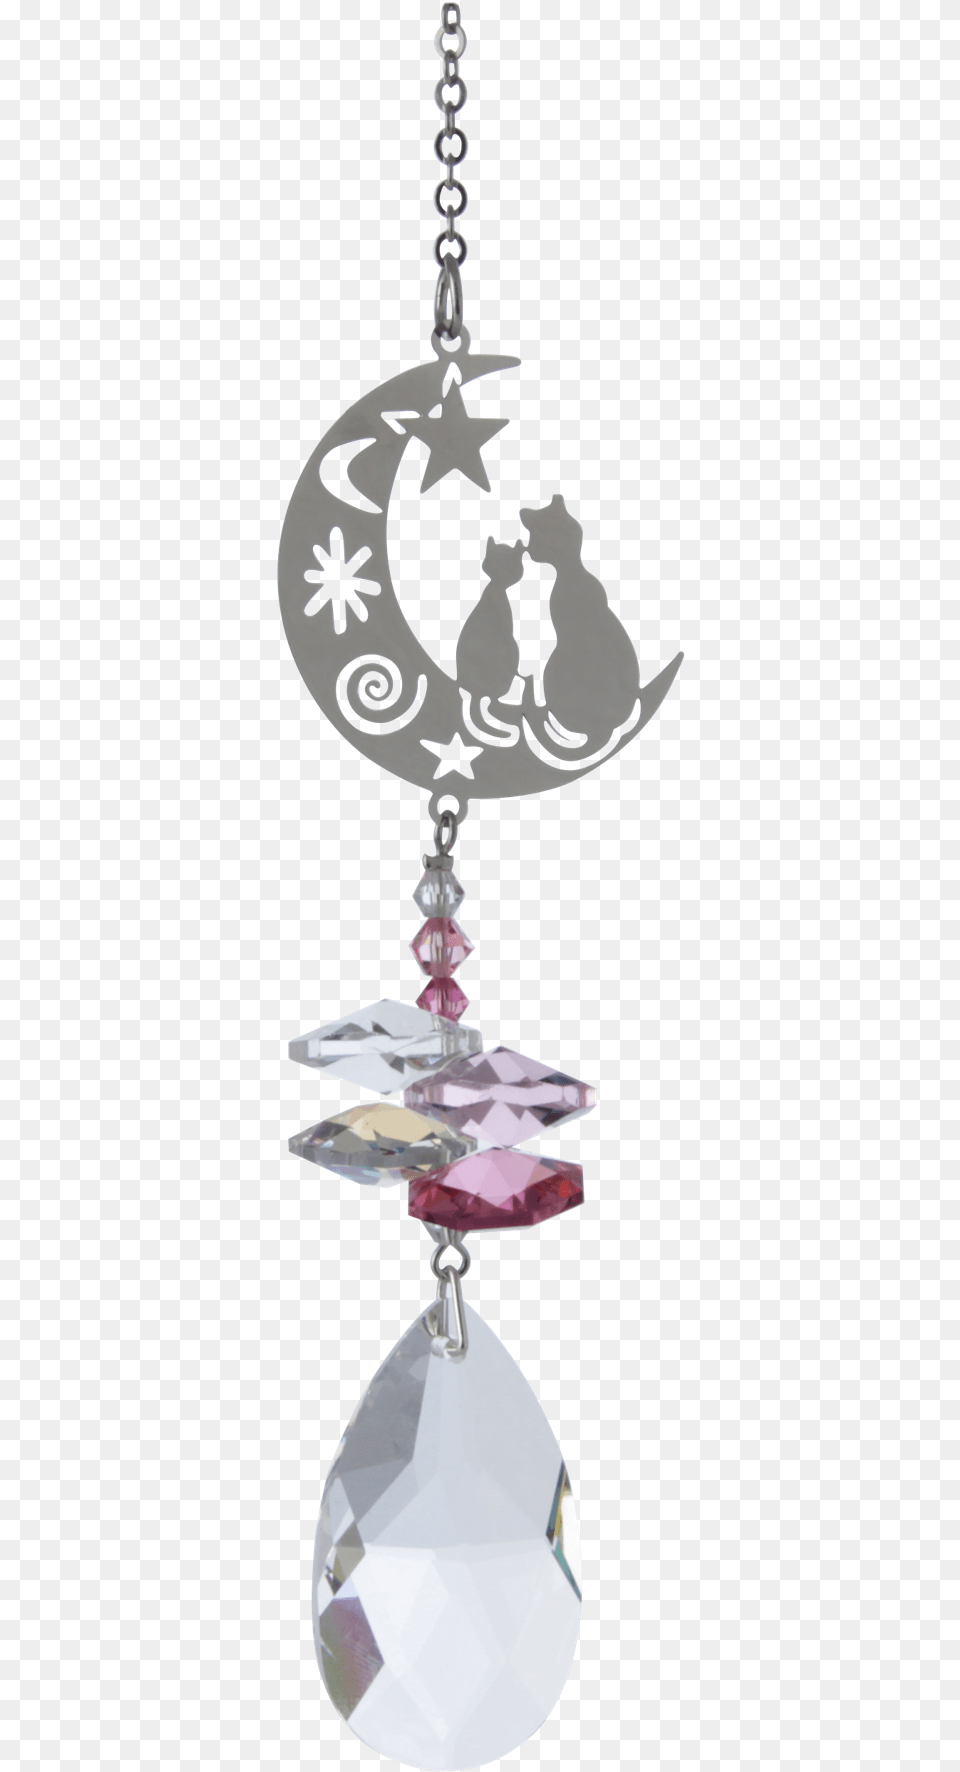 Abbfacfd Fbc2 40de A79a A885a5b499f9 Swarovski Crystal Fantasy Suncatcher Two Cats, Accessories, Earring, Jewelry Free Transparent Png